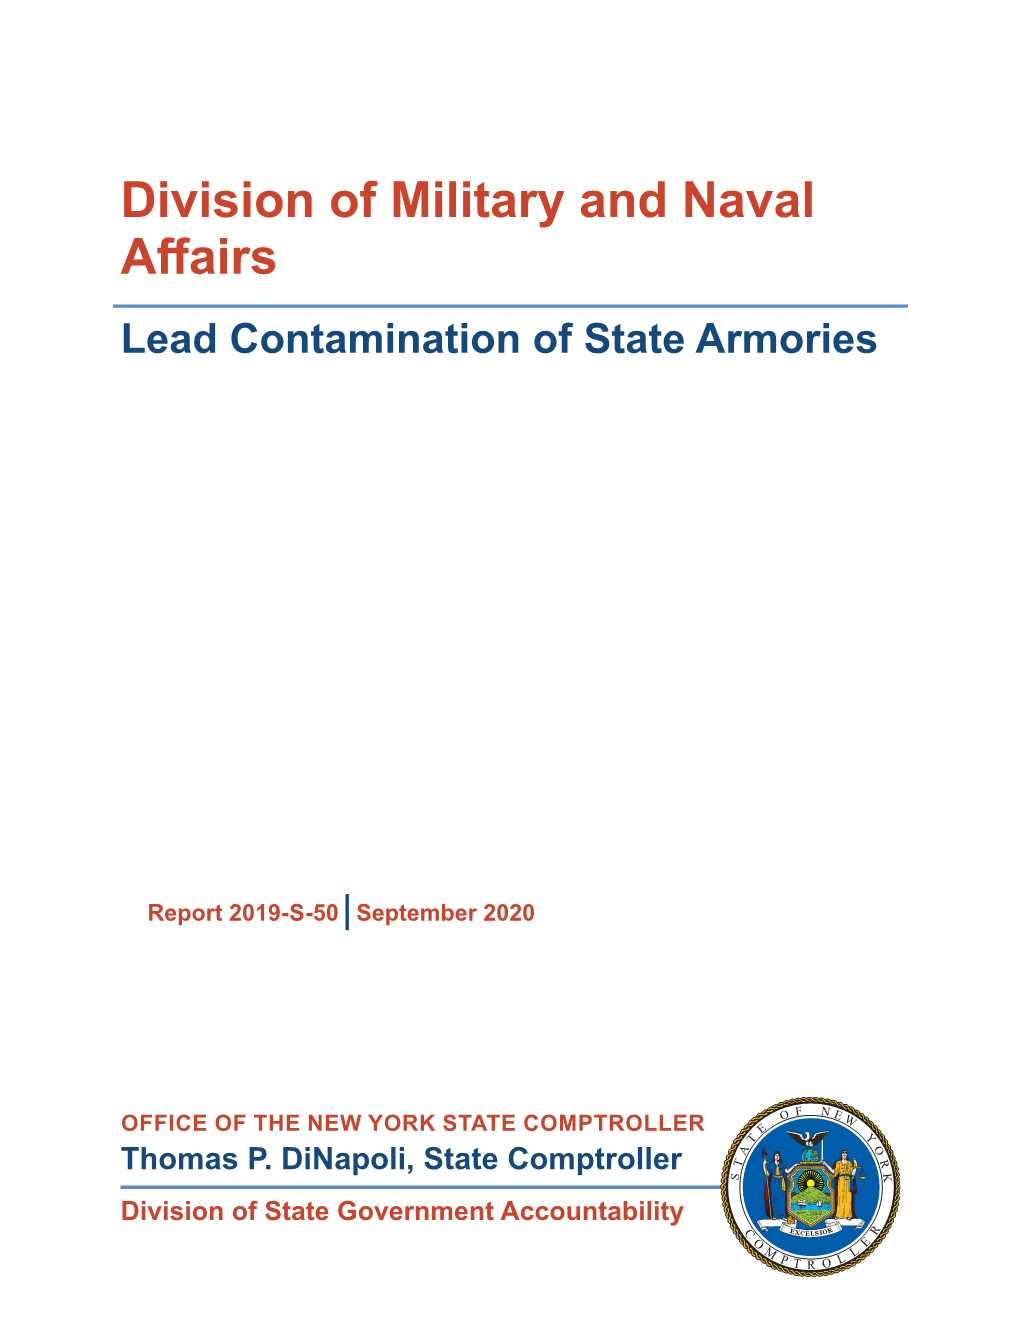 Lead Contamination of State Armories